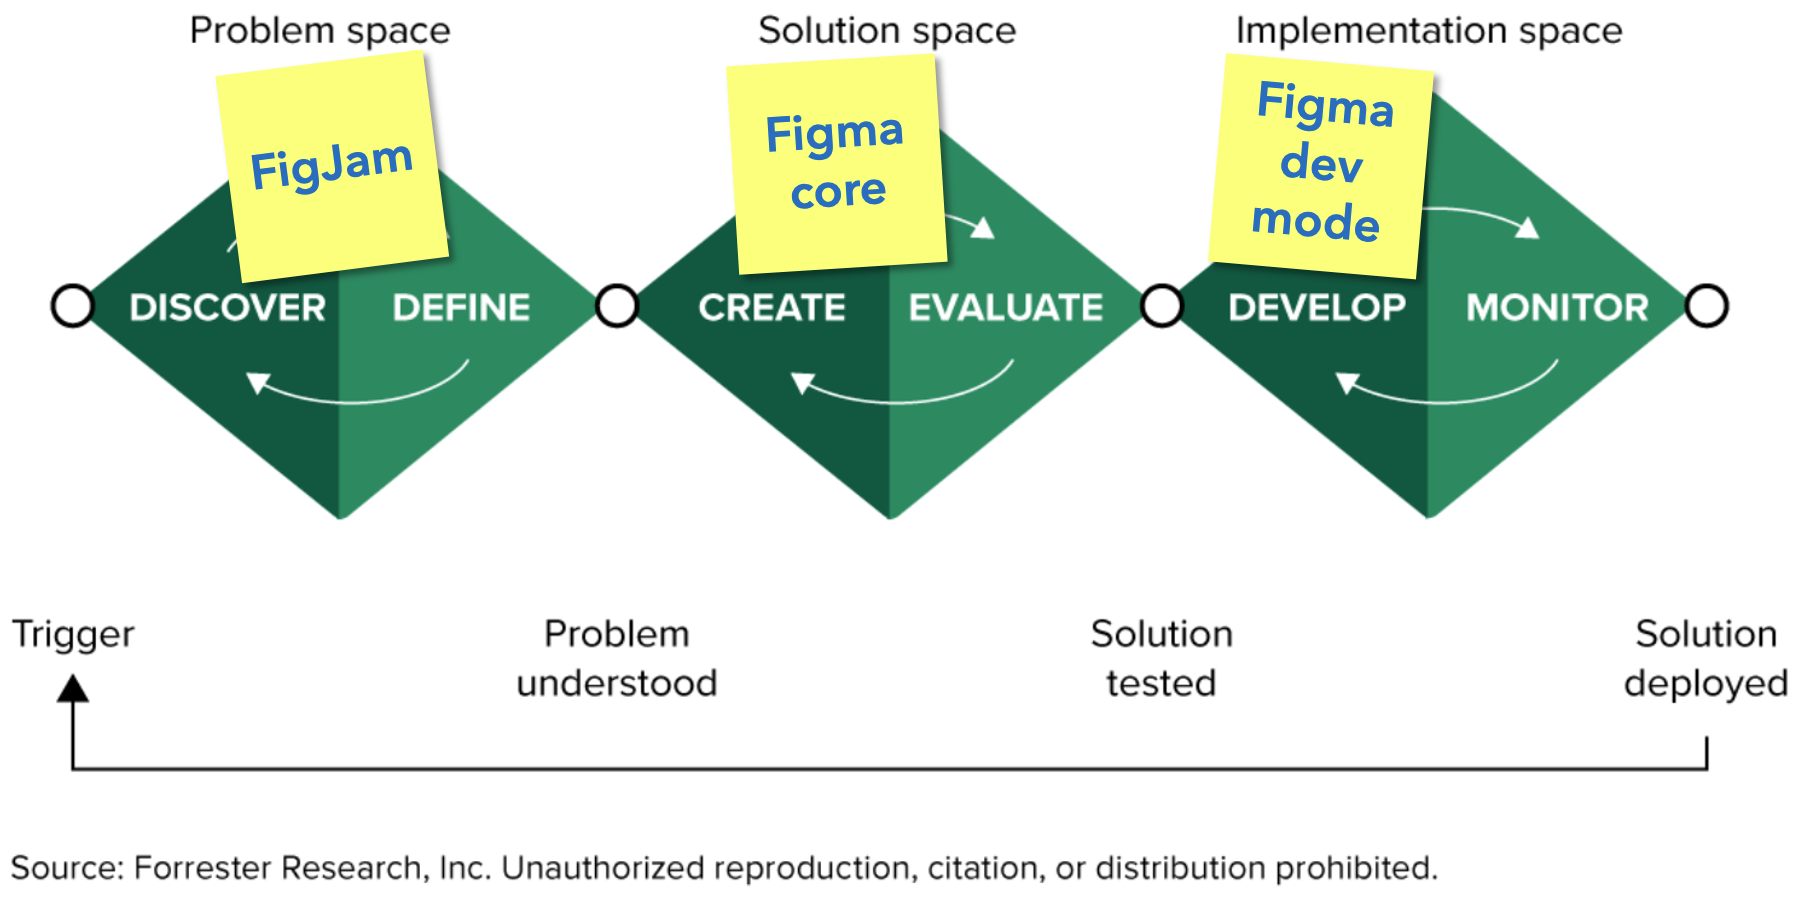 The design framework spans three spaces: problem, solution, and implementation